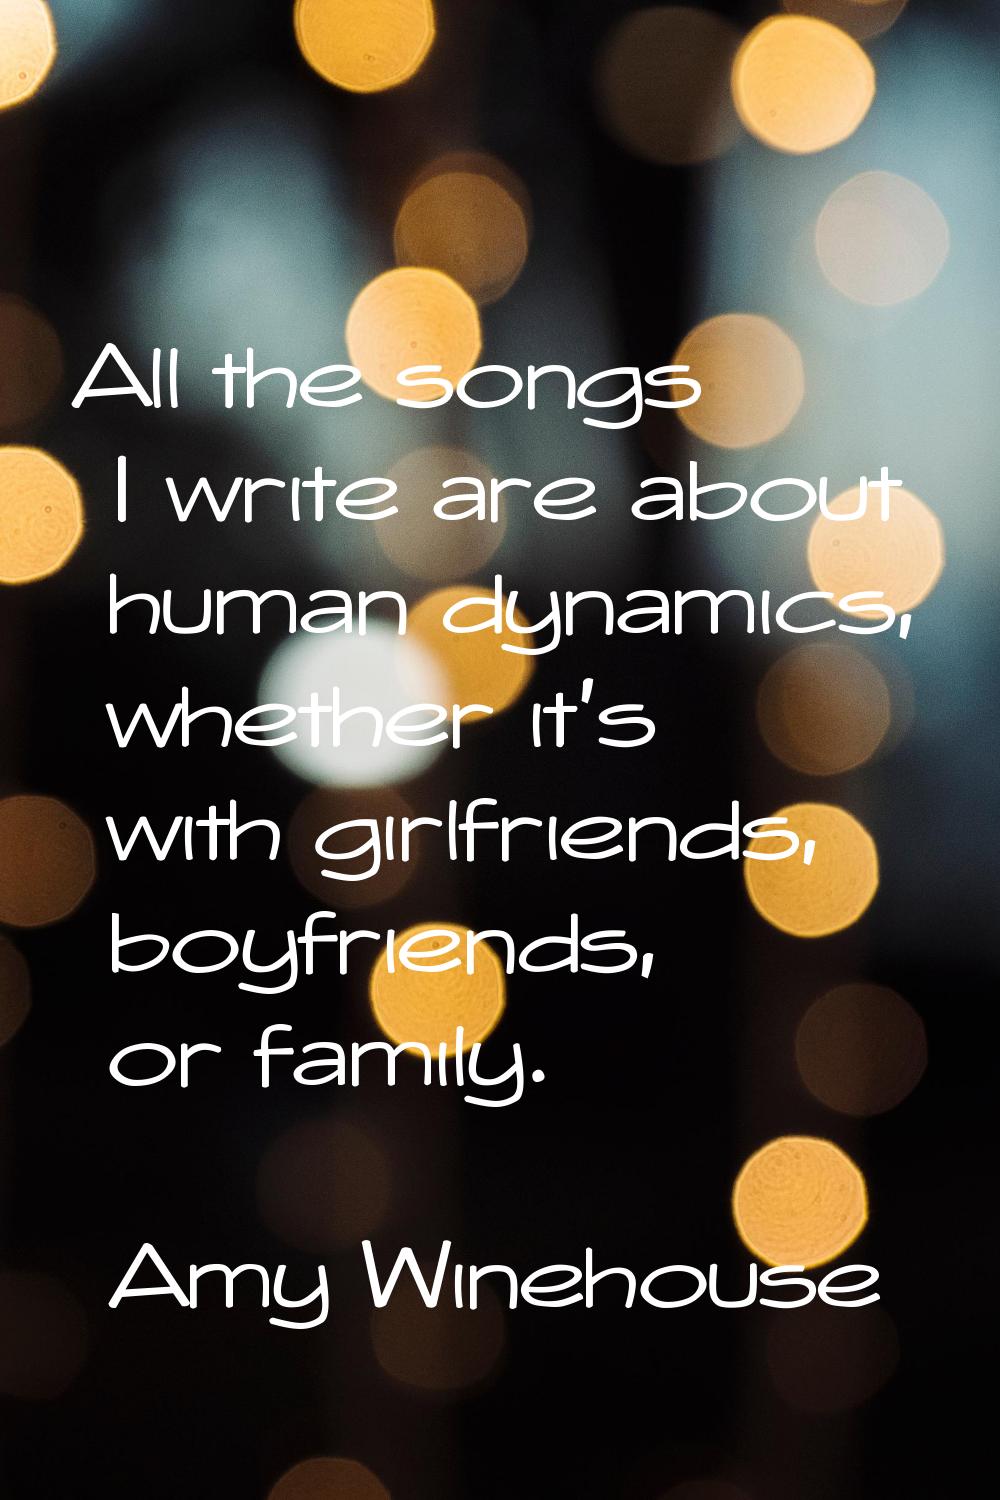 All the songs I write are about human dynamics, whether it's with girlfriends, boyfriends, or famil